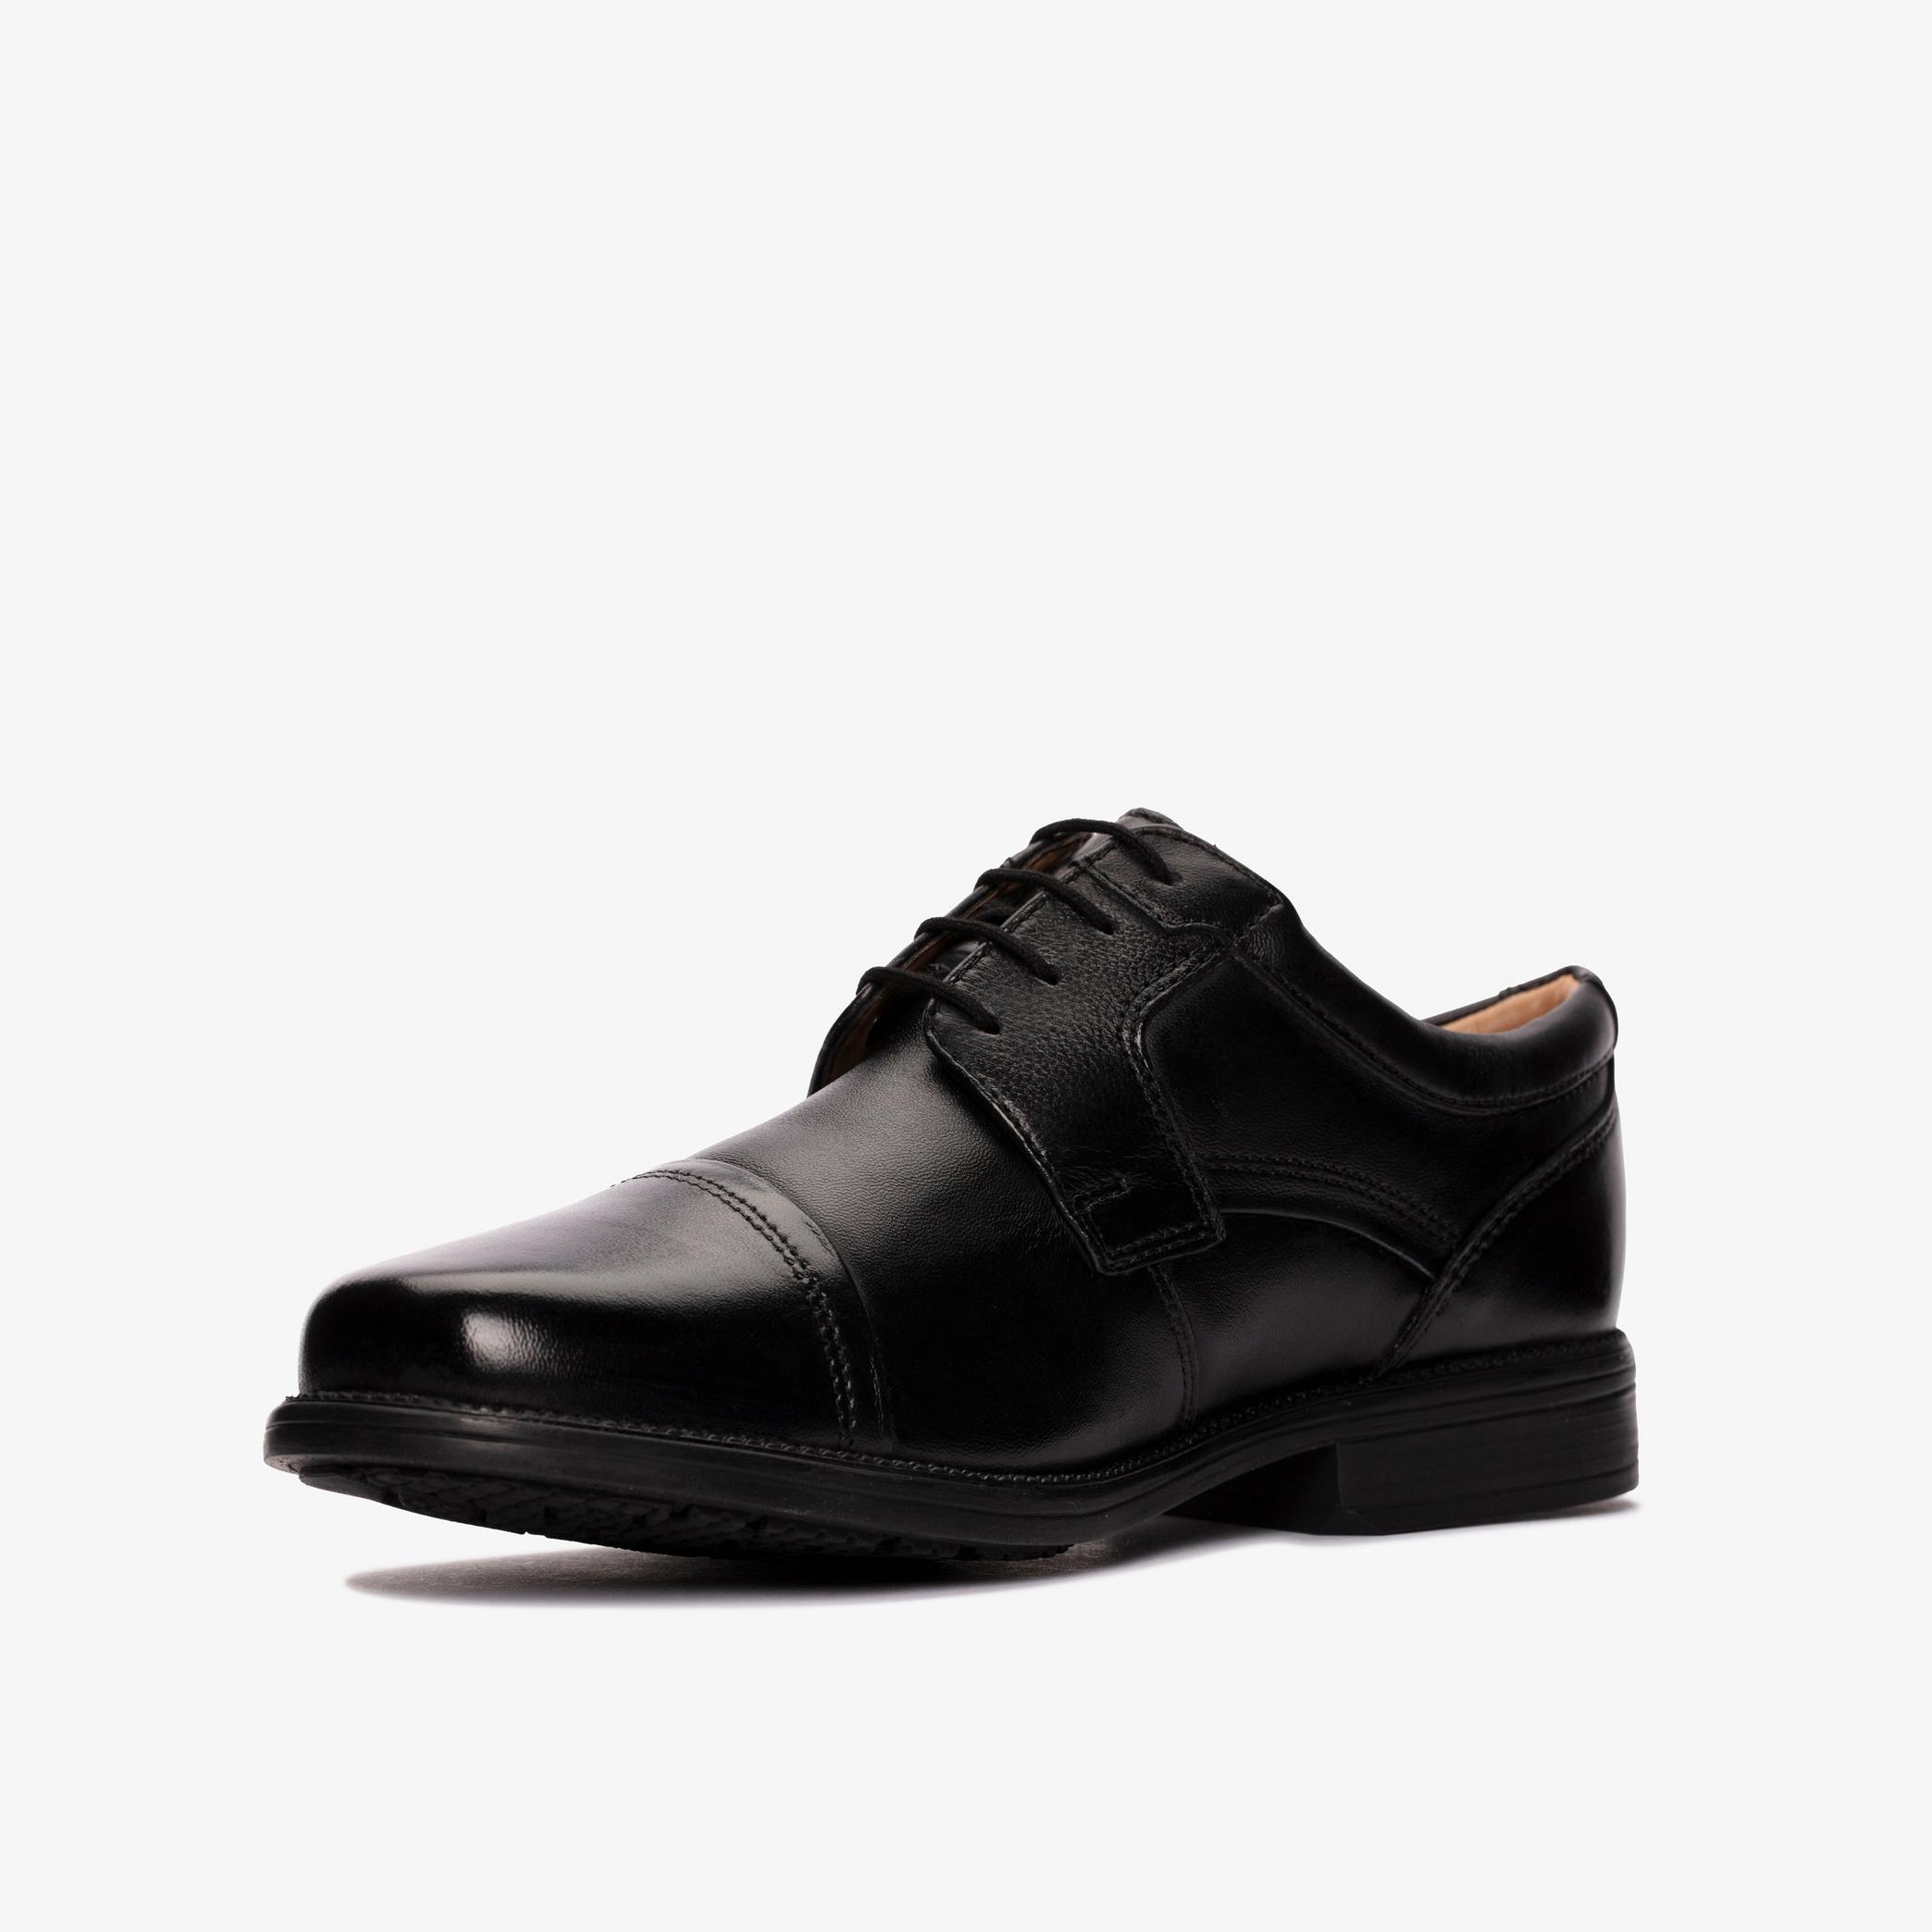 Hail Cap Black Leather Shoes, view 4 of 6